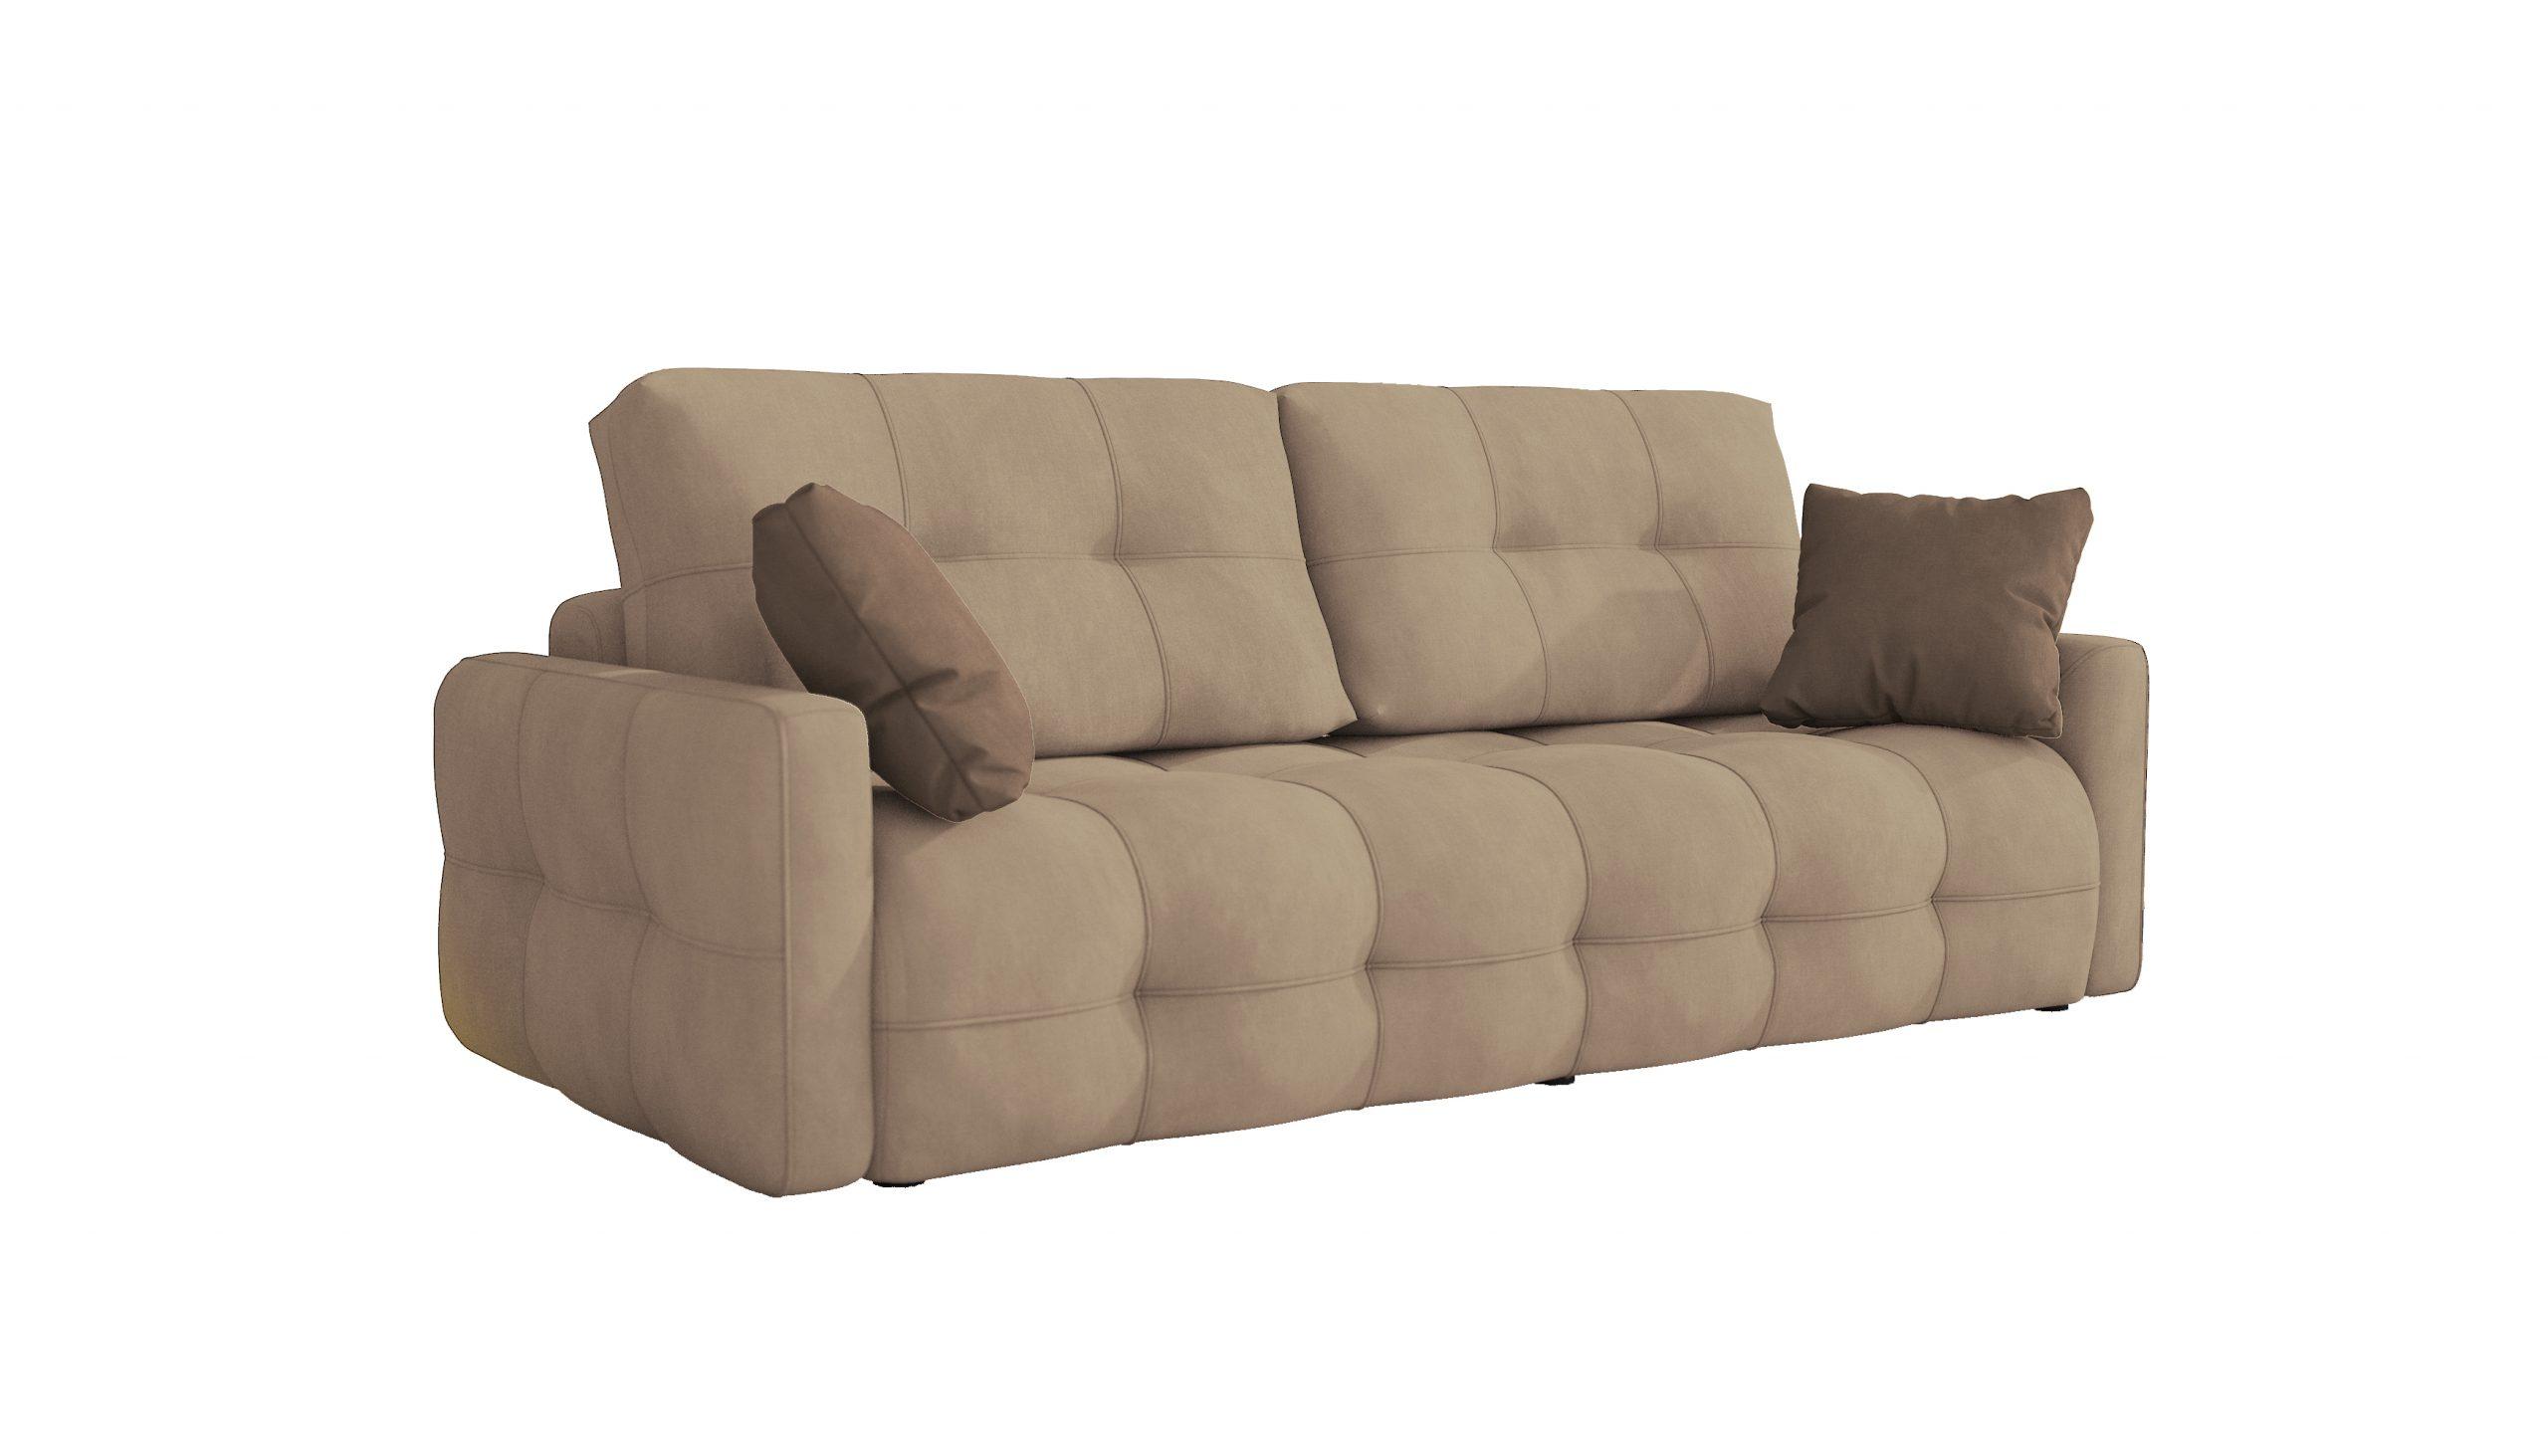 Contemporary, Modern Sofa bed Astrid Queen Sofa Bed Astrid-Beige-Sofa-Bed Astrid-Beige-Sofa-Bed in Beige Polyester